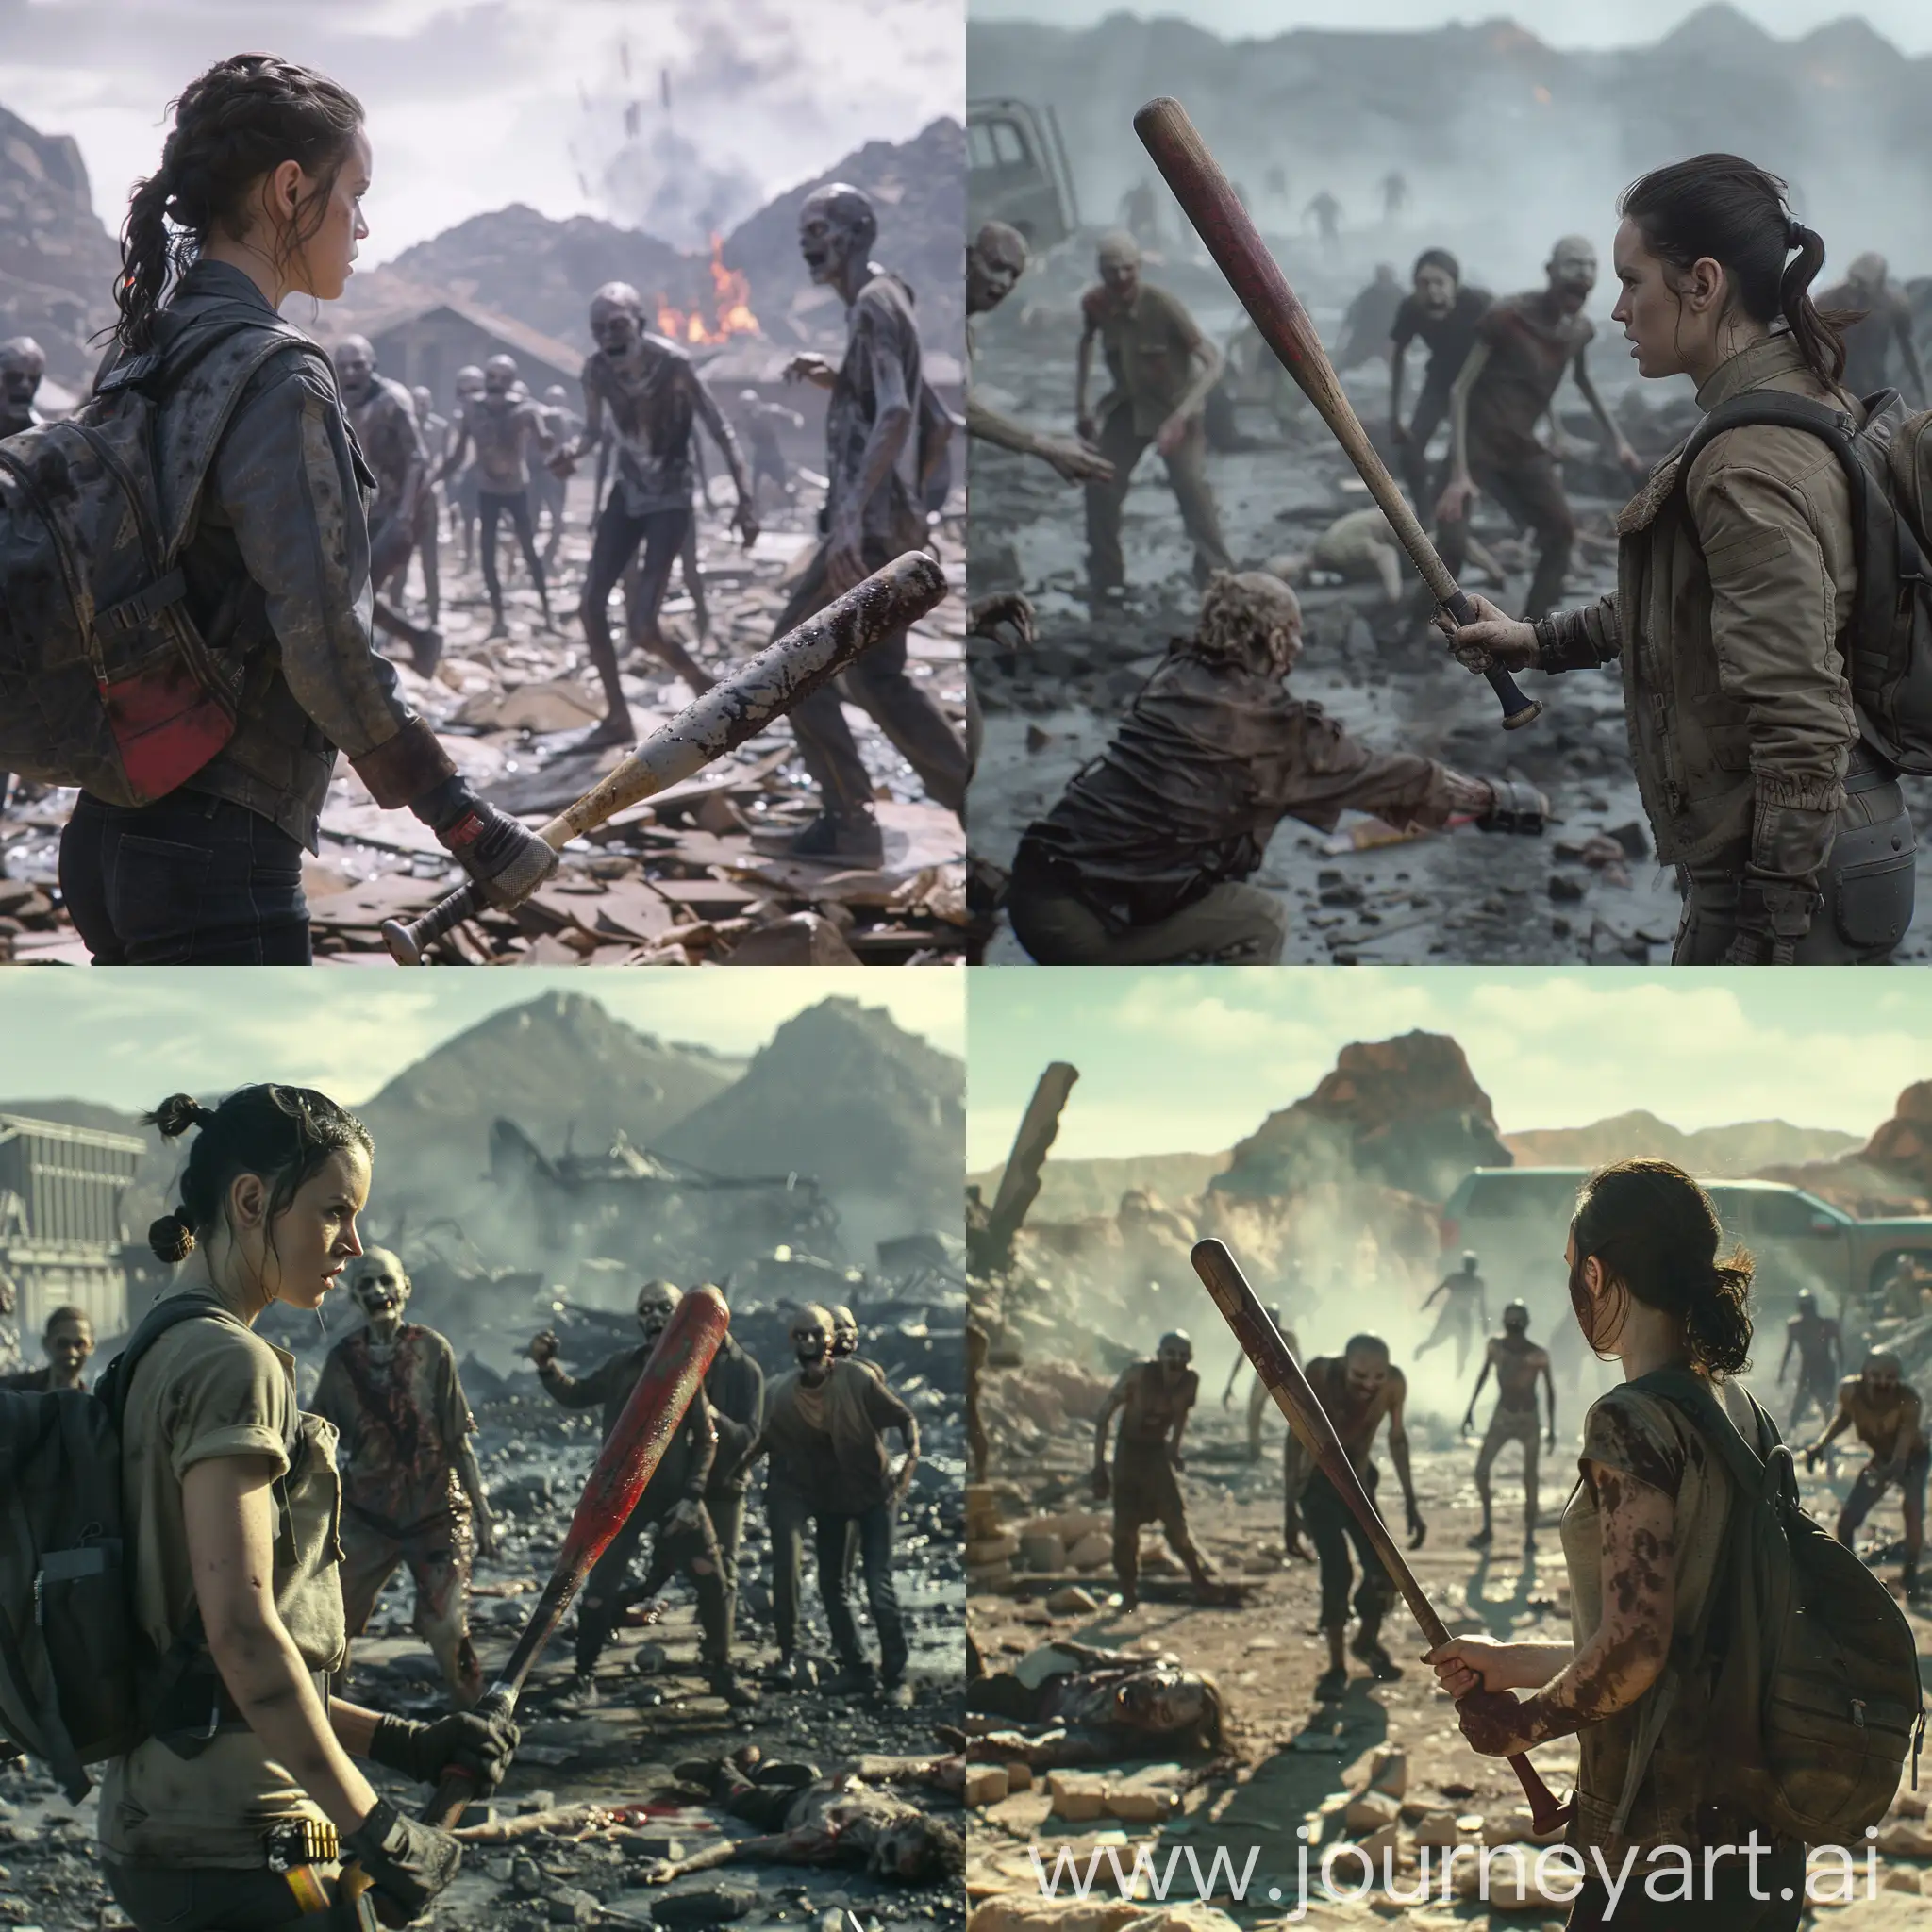 Daisy-Ridley-Battling-Zombies-in-a-PostApocalyptic-World